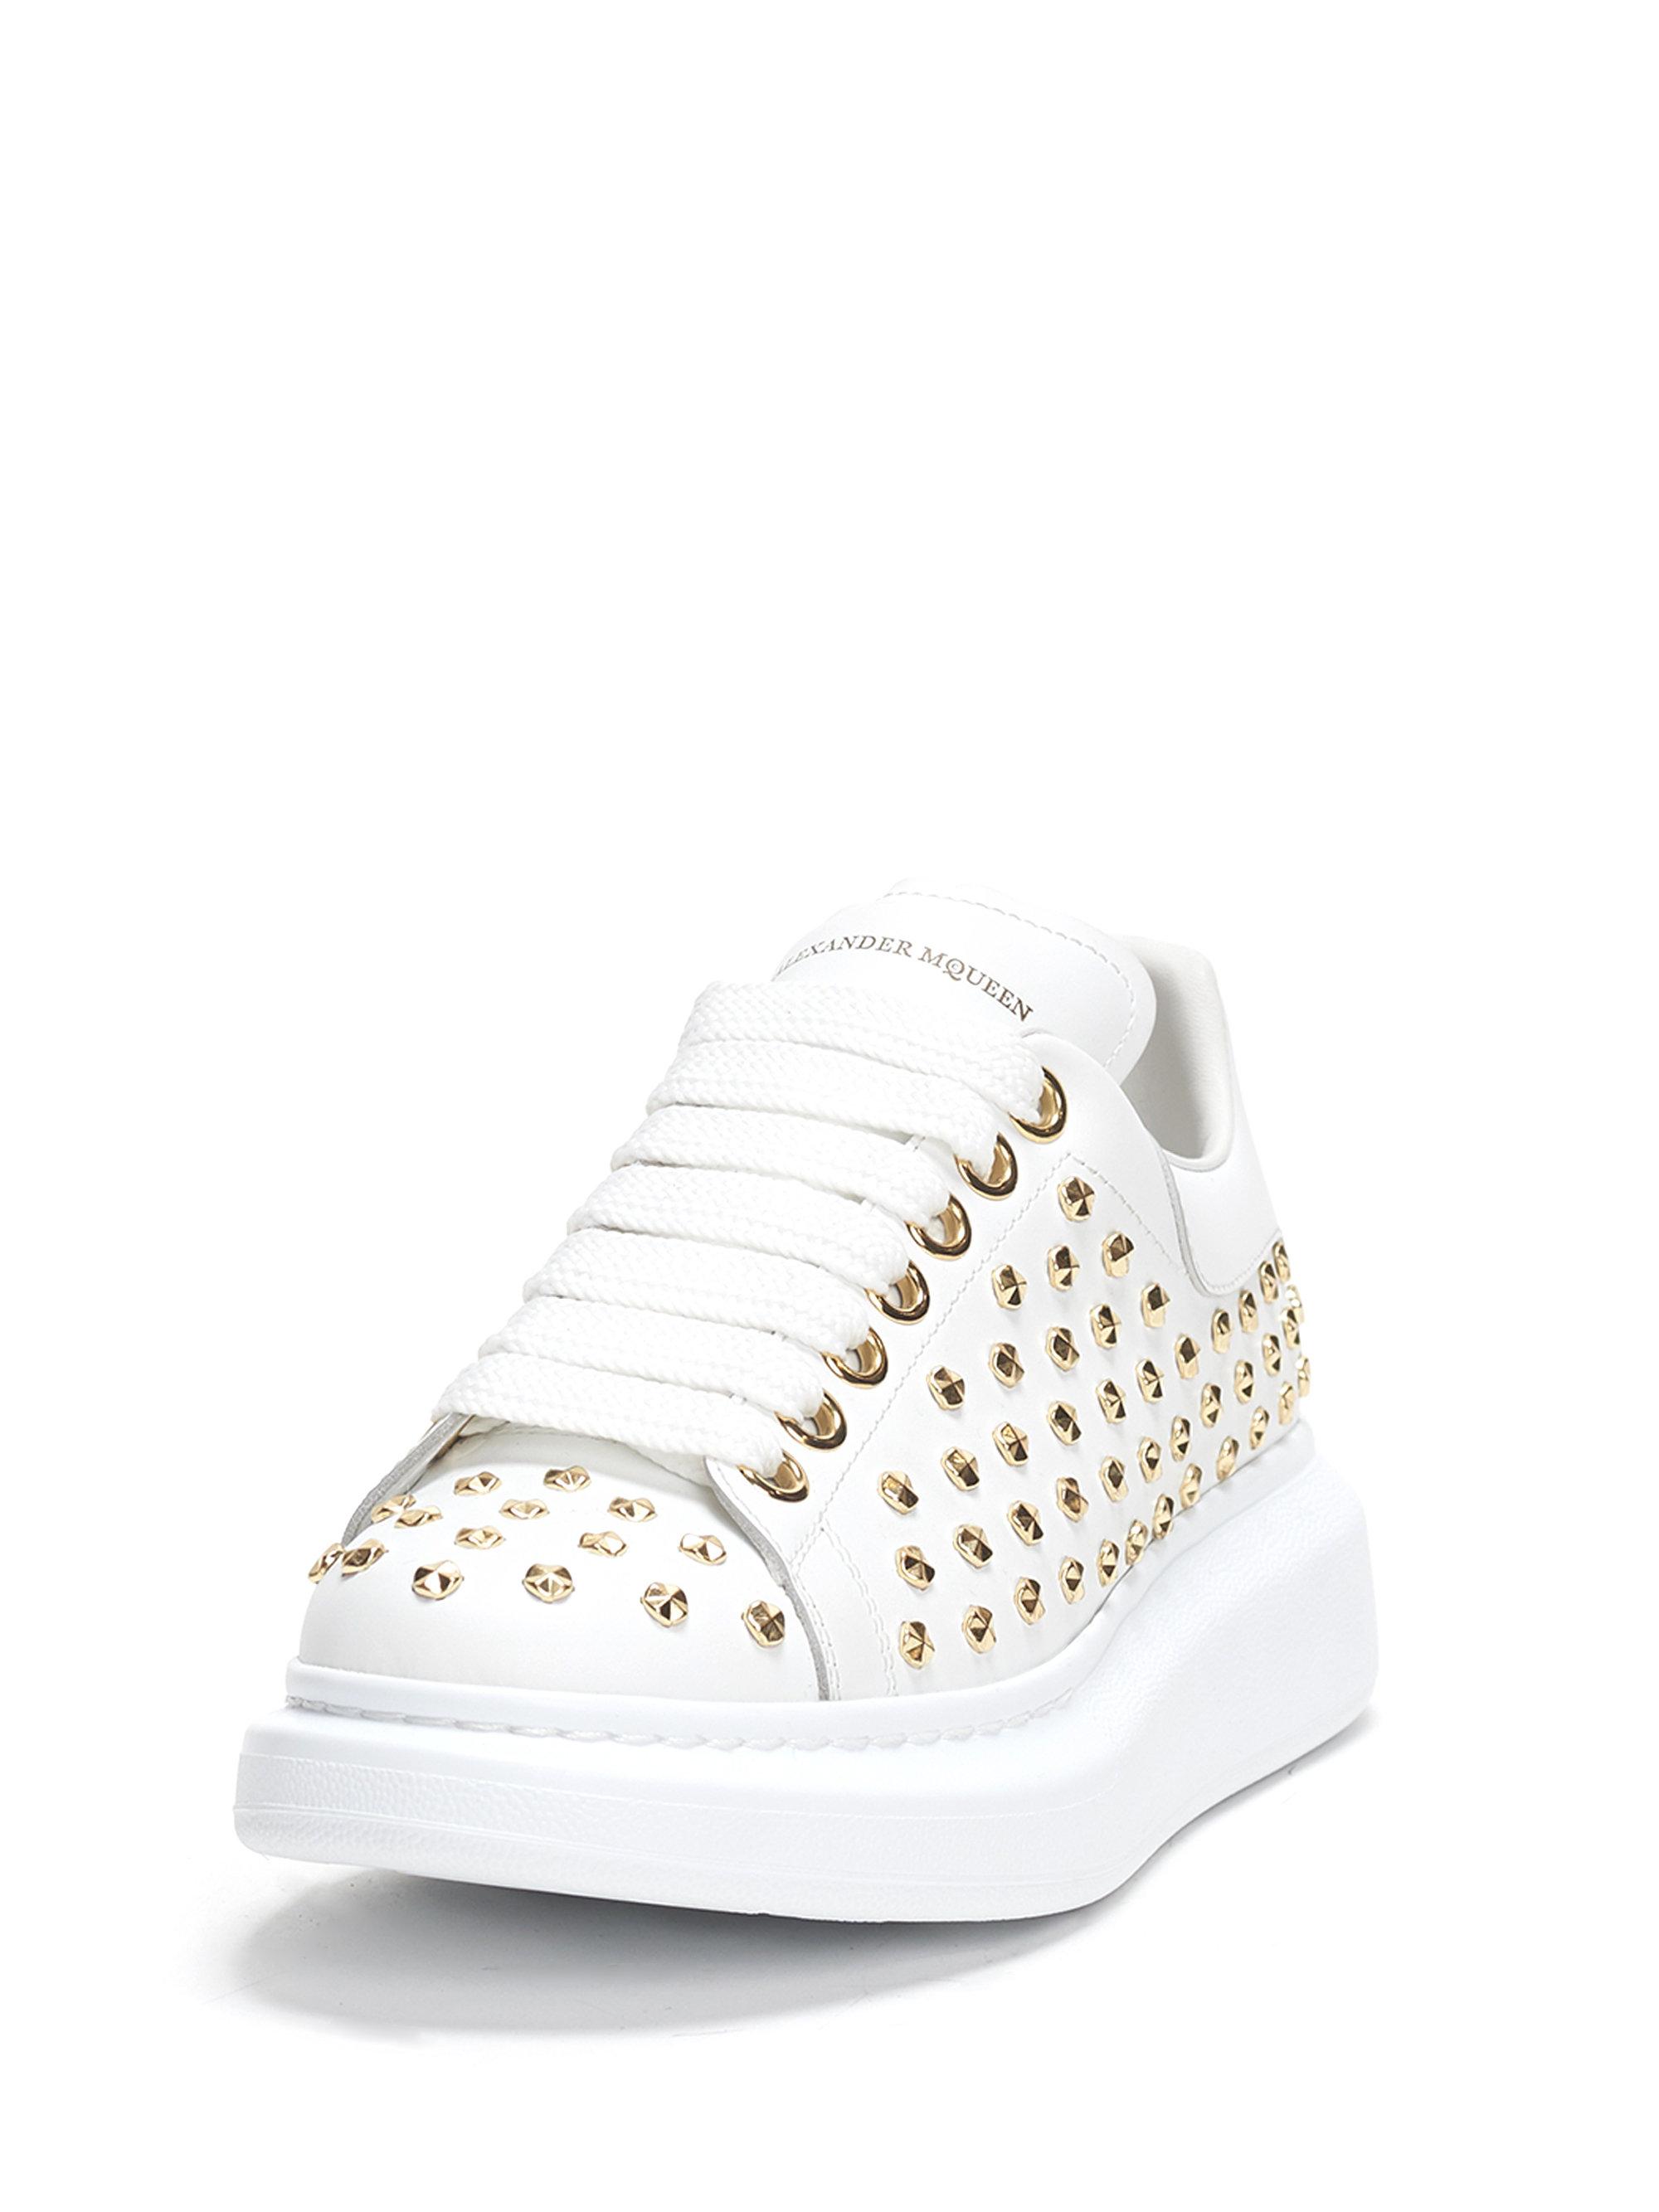 alexander mcqueen shoes with spikes 